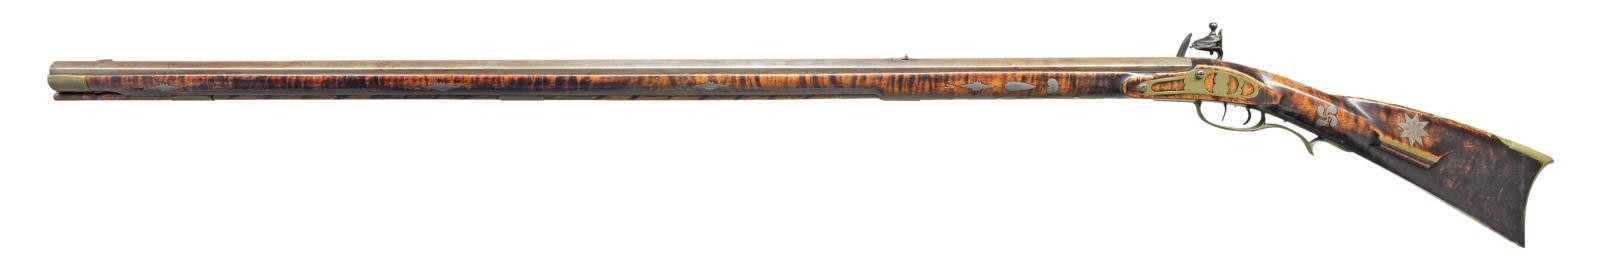 EXTREMELY DECORATED CURLY MAPLE CARVED RIFLE